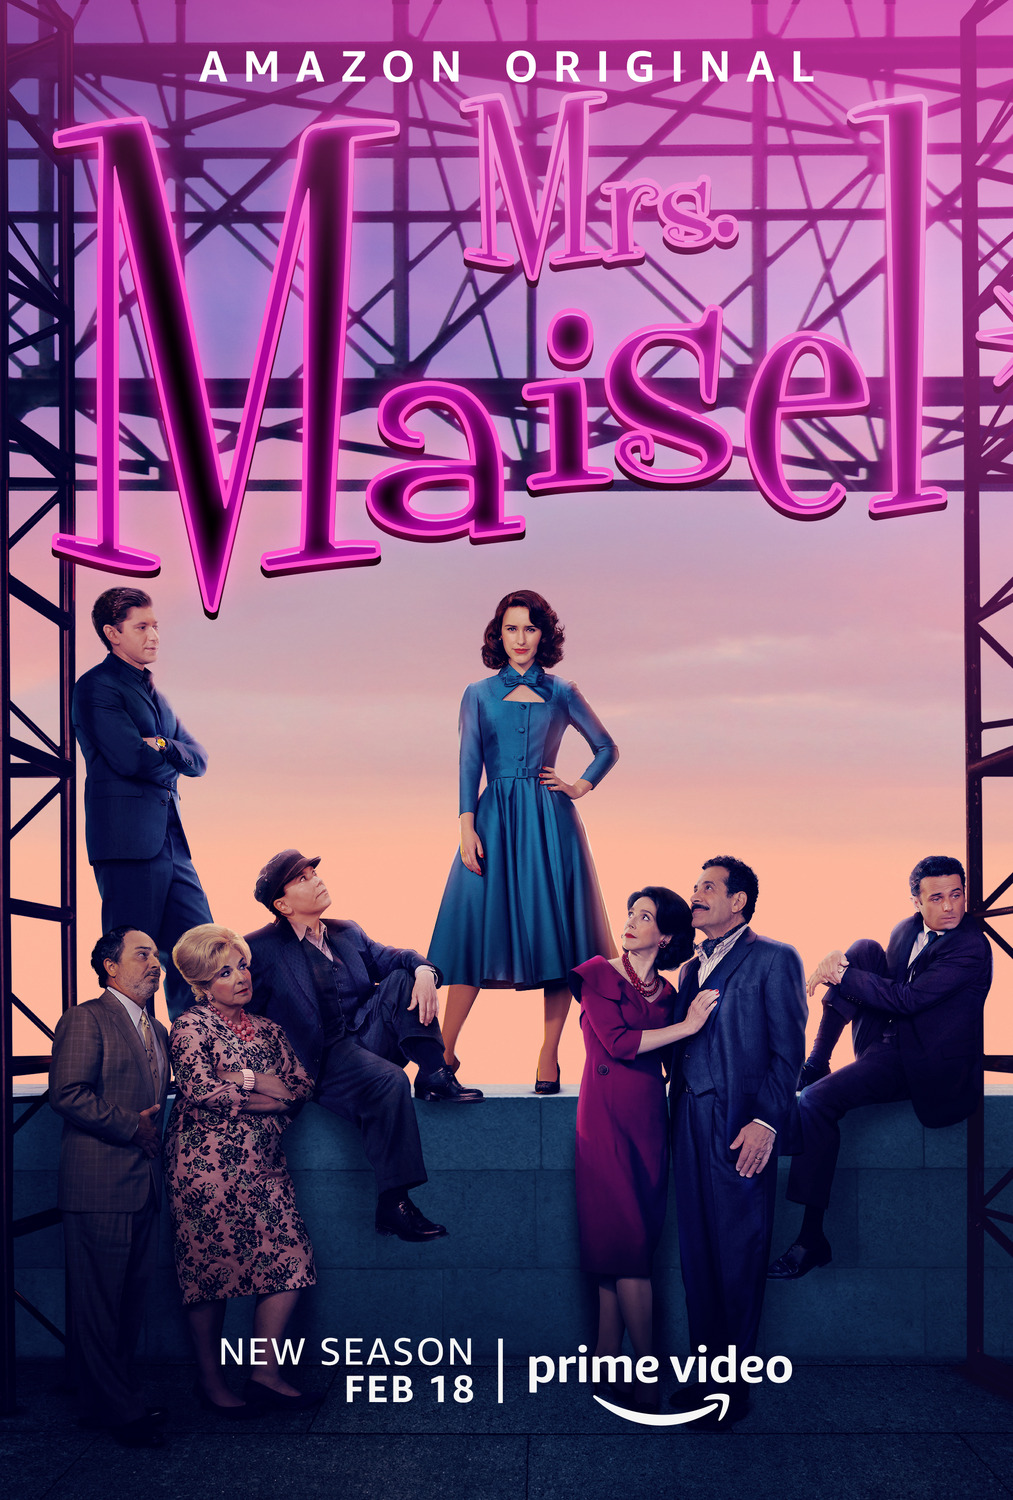 Extra Large TV Poster Image for The Marvelous Mrs. Maisel (#13 of 16)